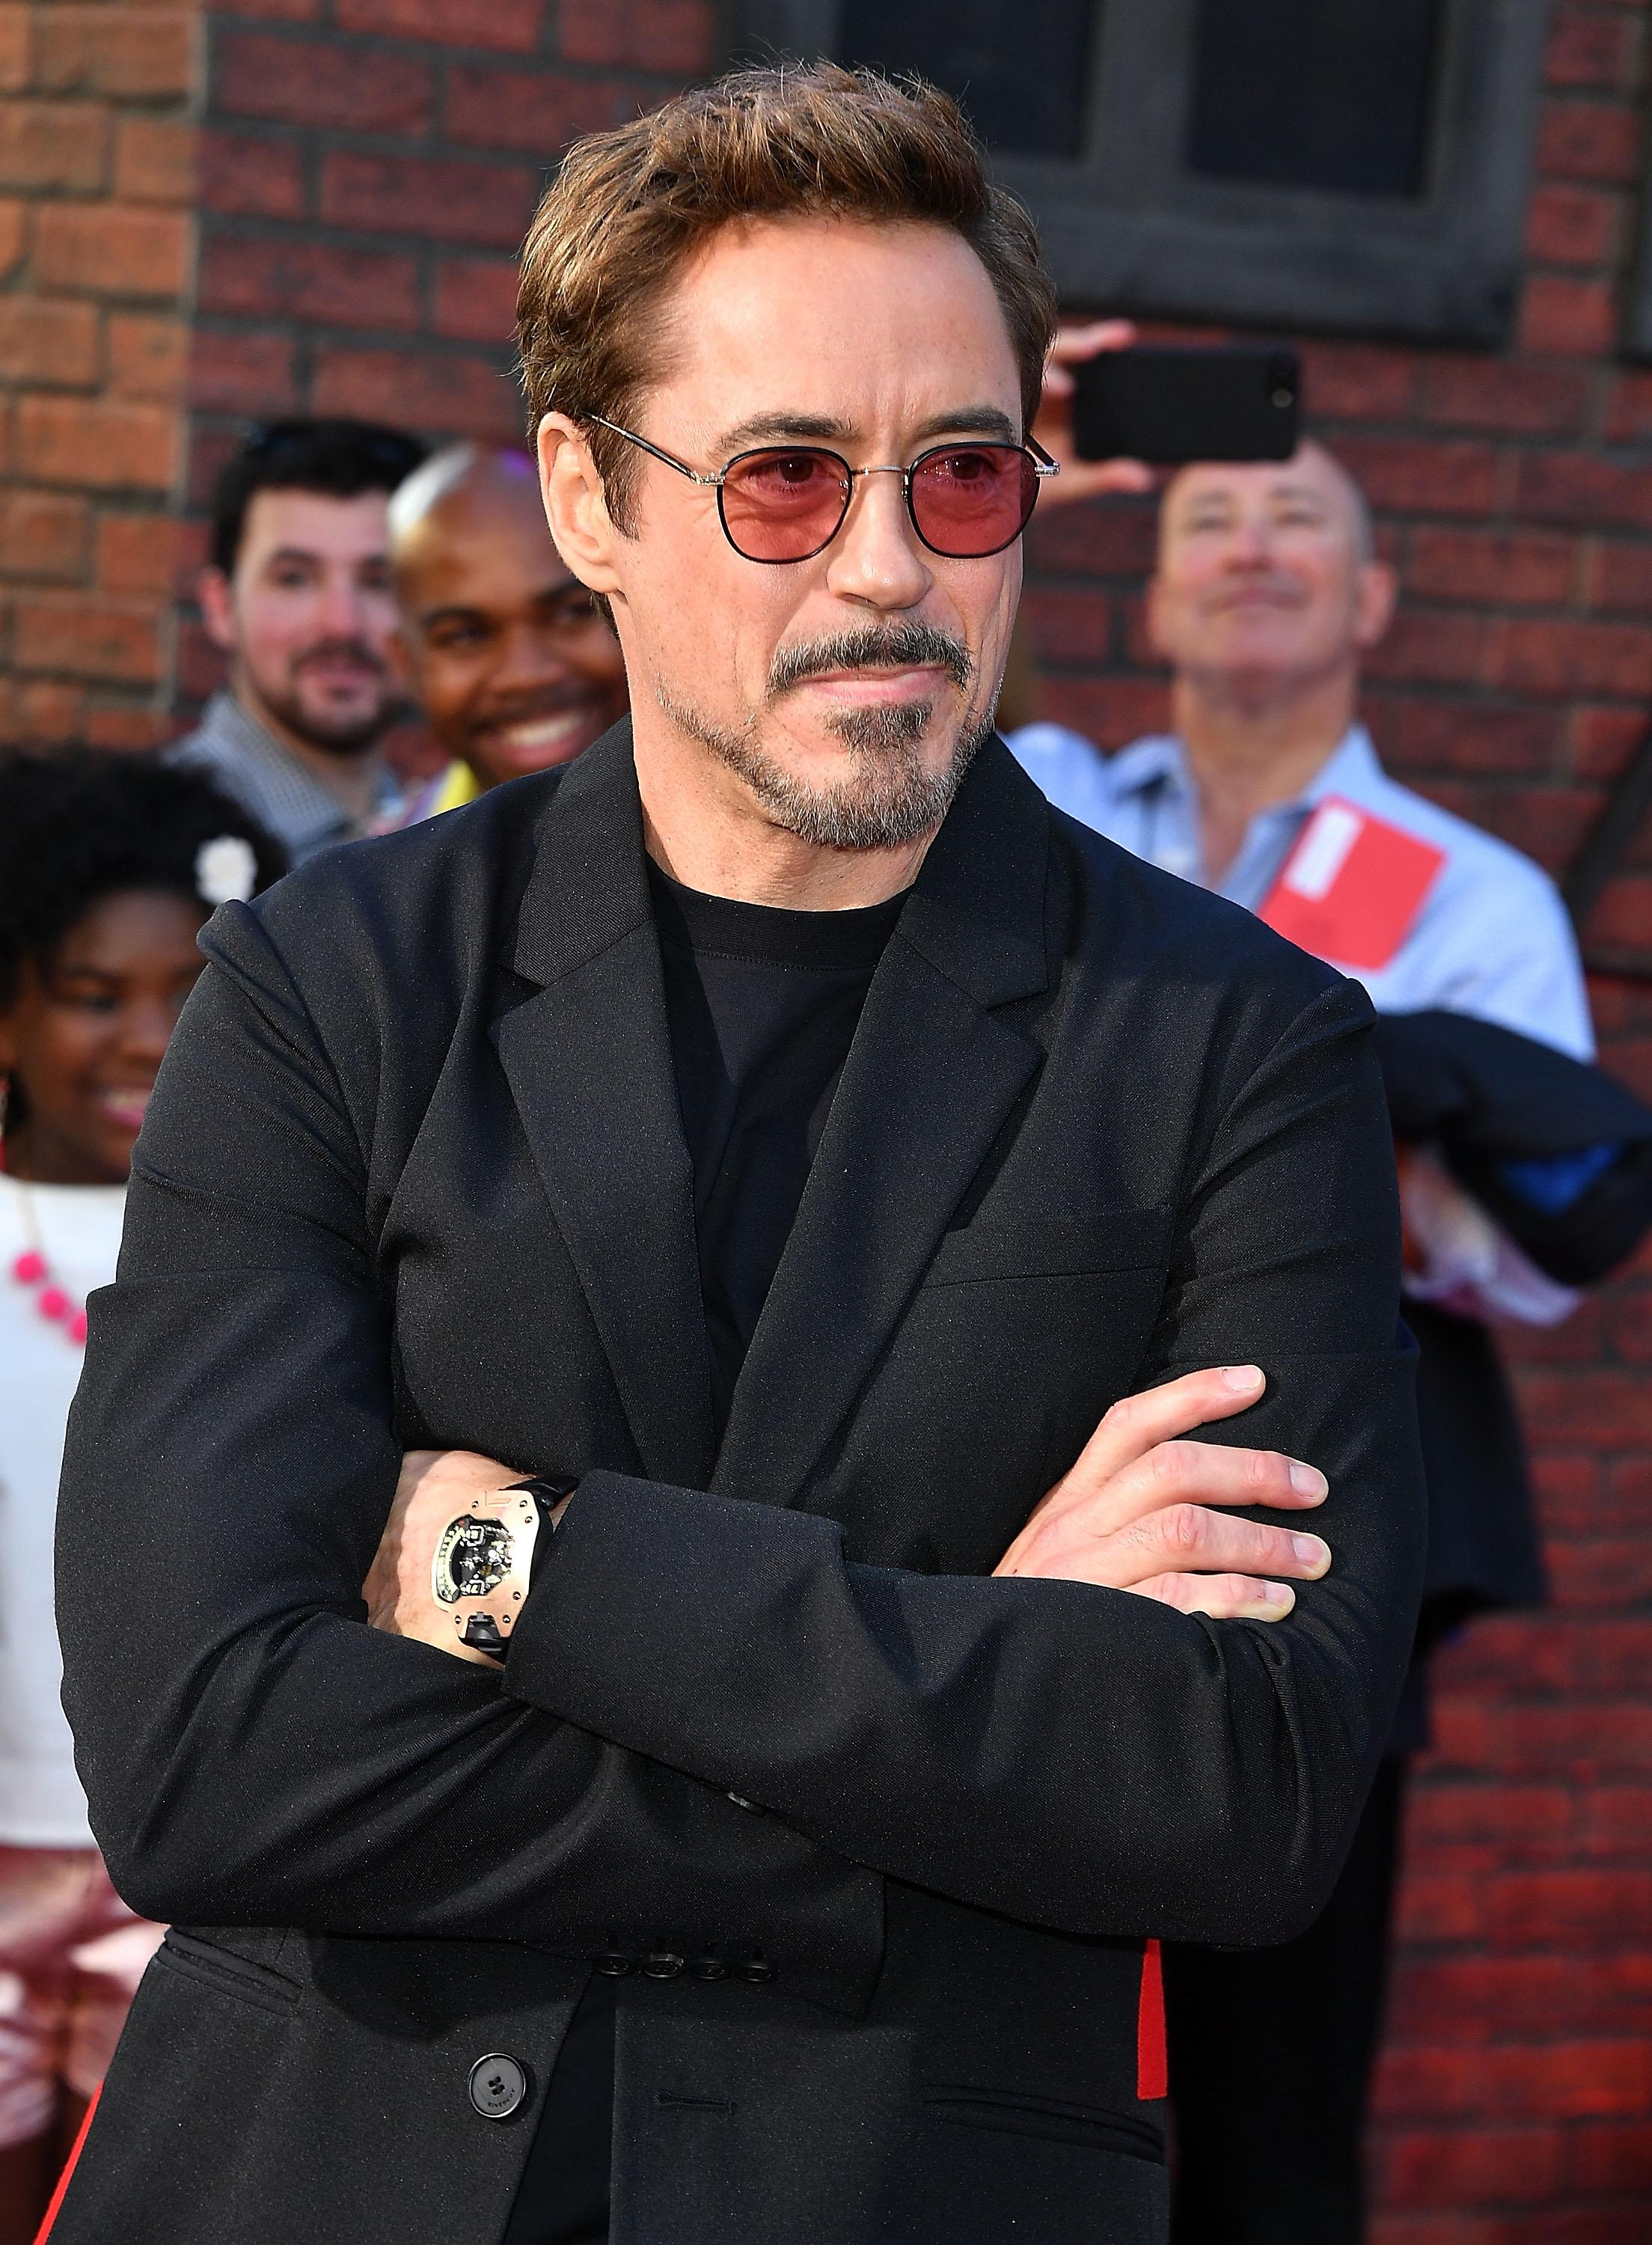 HOLLYWOOD, CA - JUNE 28:  Robert Downey Jr. arrives at the Premiere Of Columbia Pictures' "Spider-Man: Homecoming" at TCL Chinese Theatre on June 28, 2017 in Hollywood, California.  (Photo by Steve Granitz/WireImage)